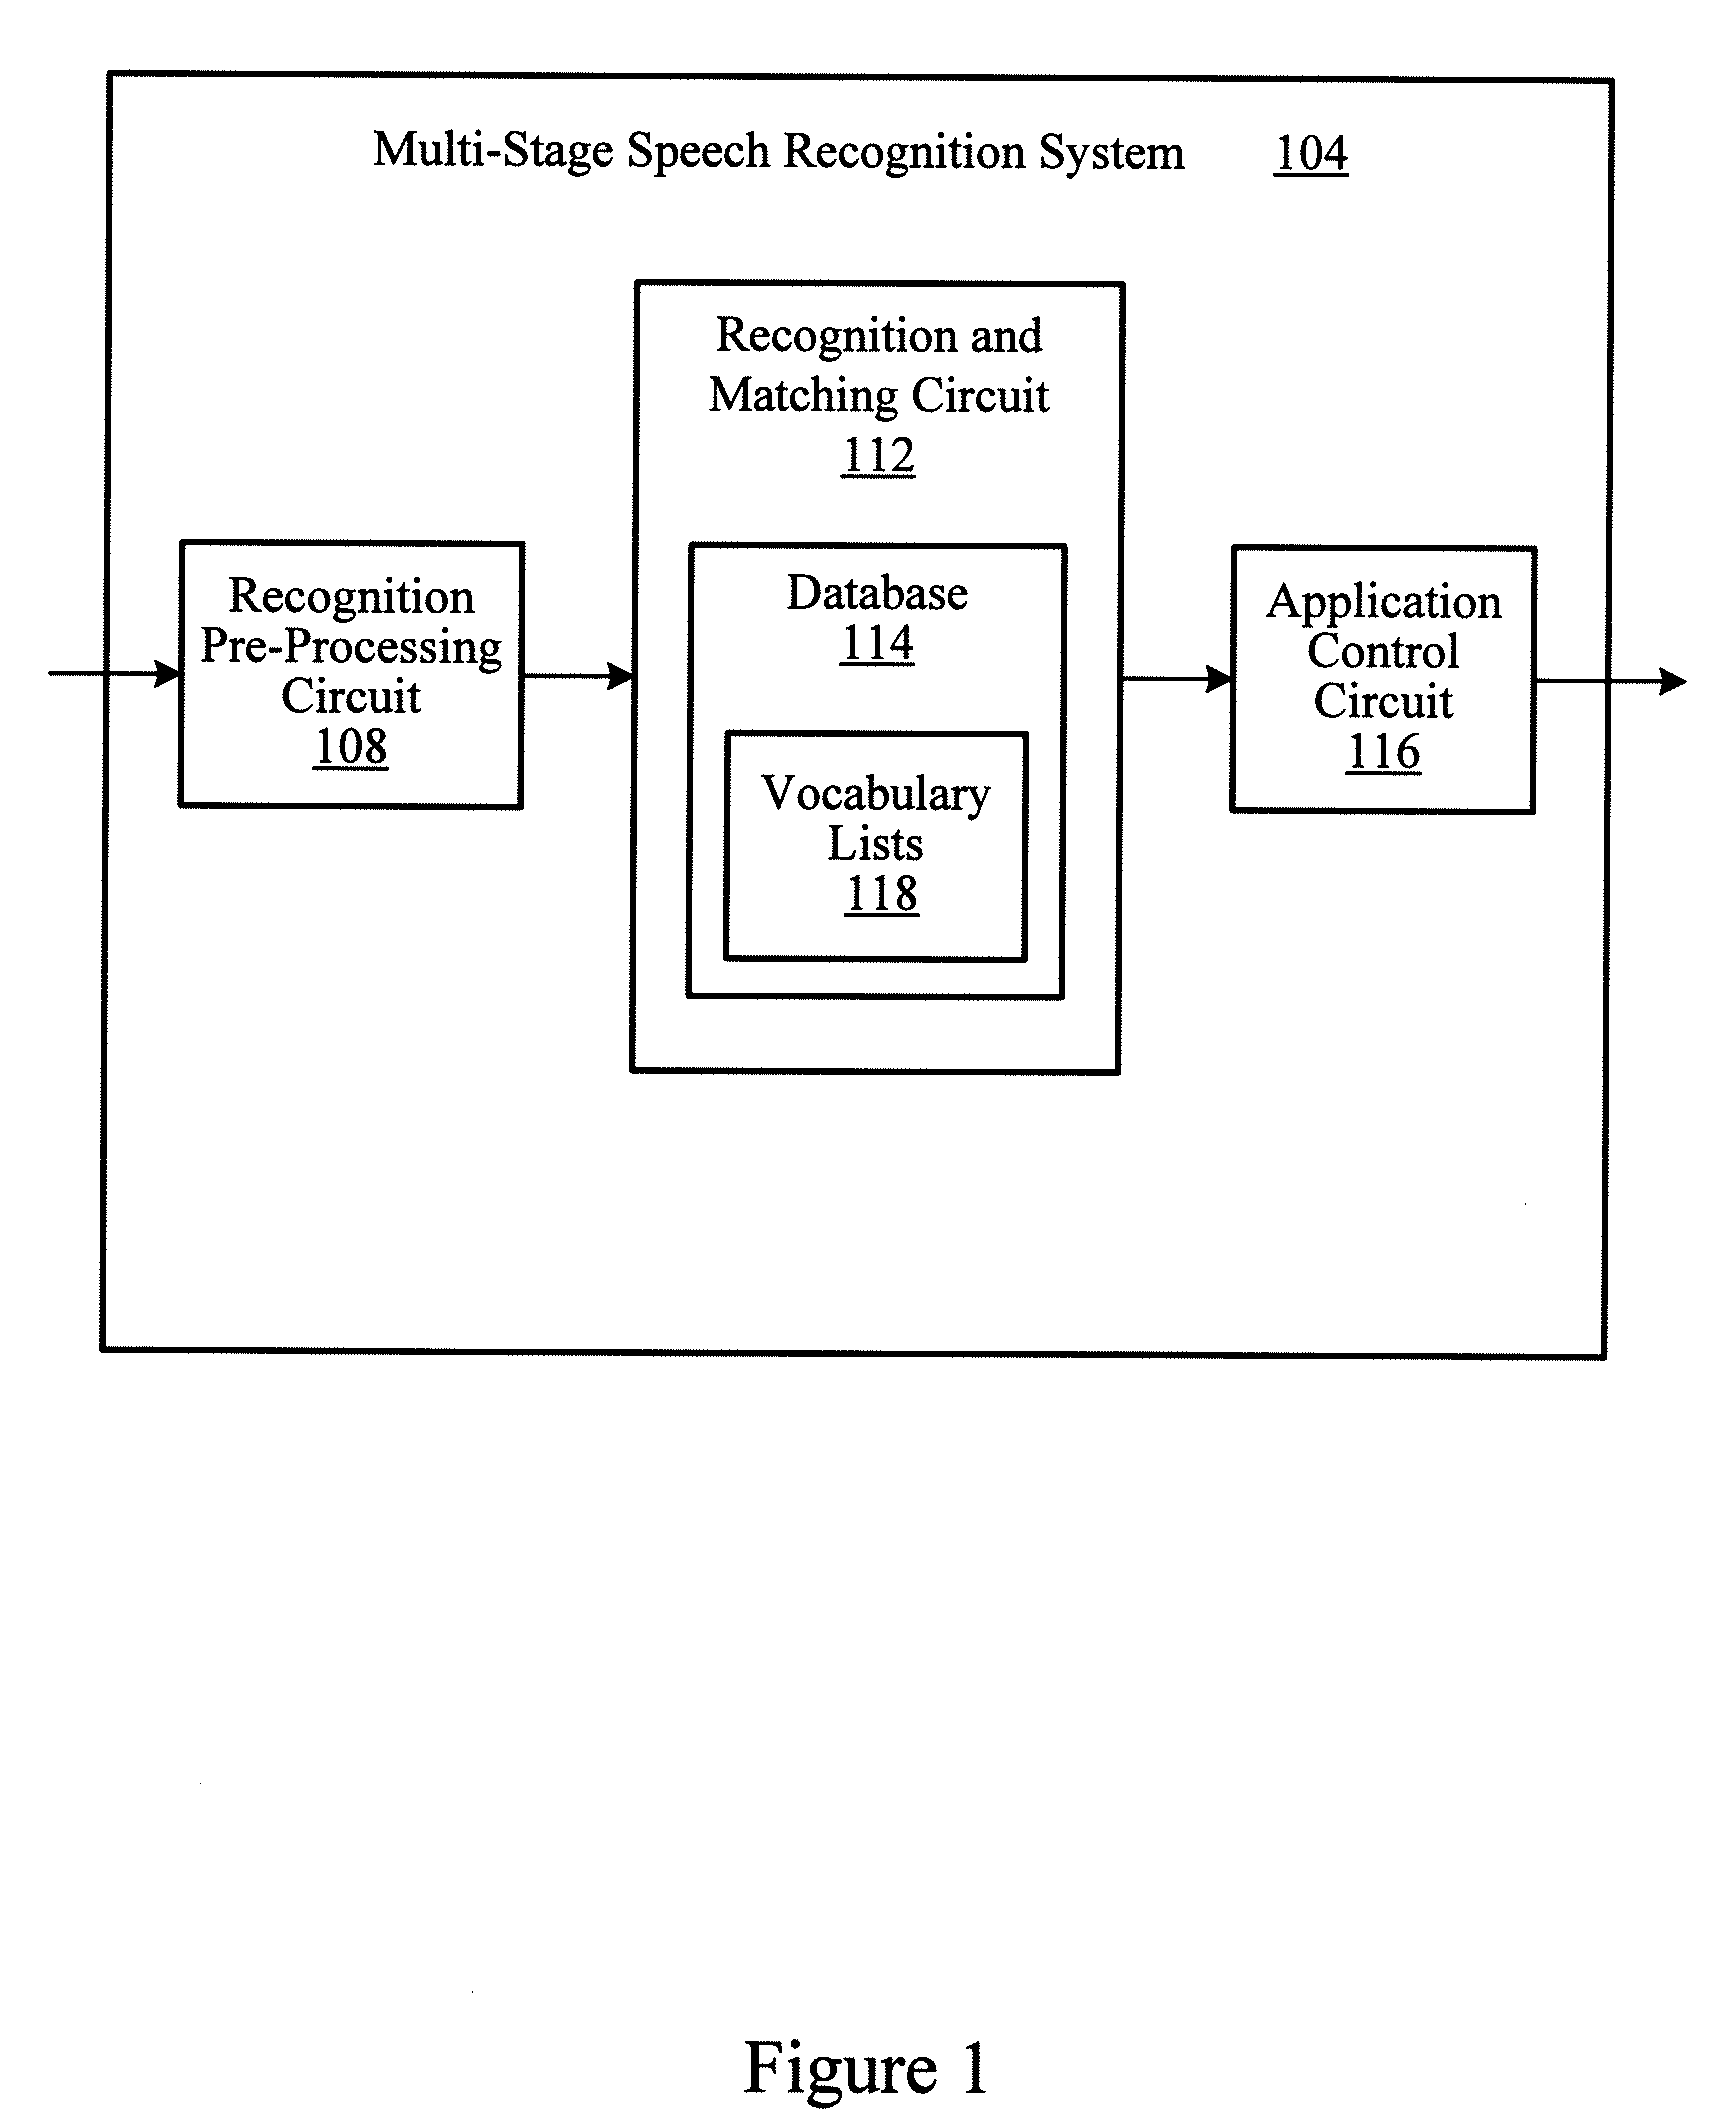 Multi-Stage Speech Recognition System